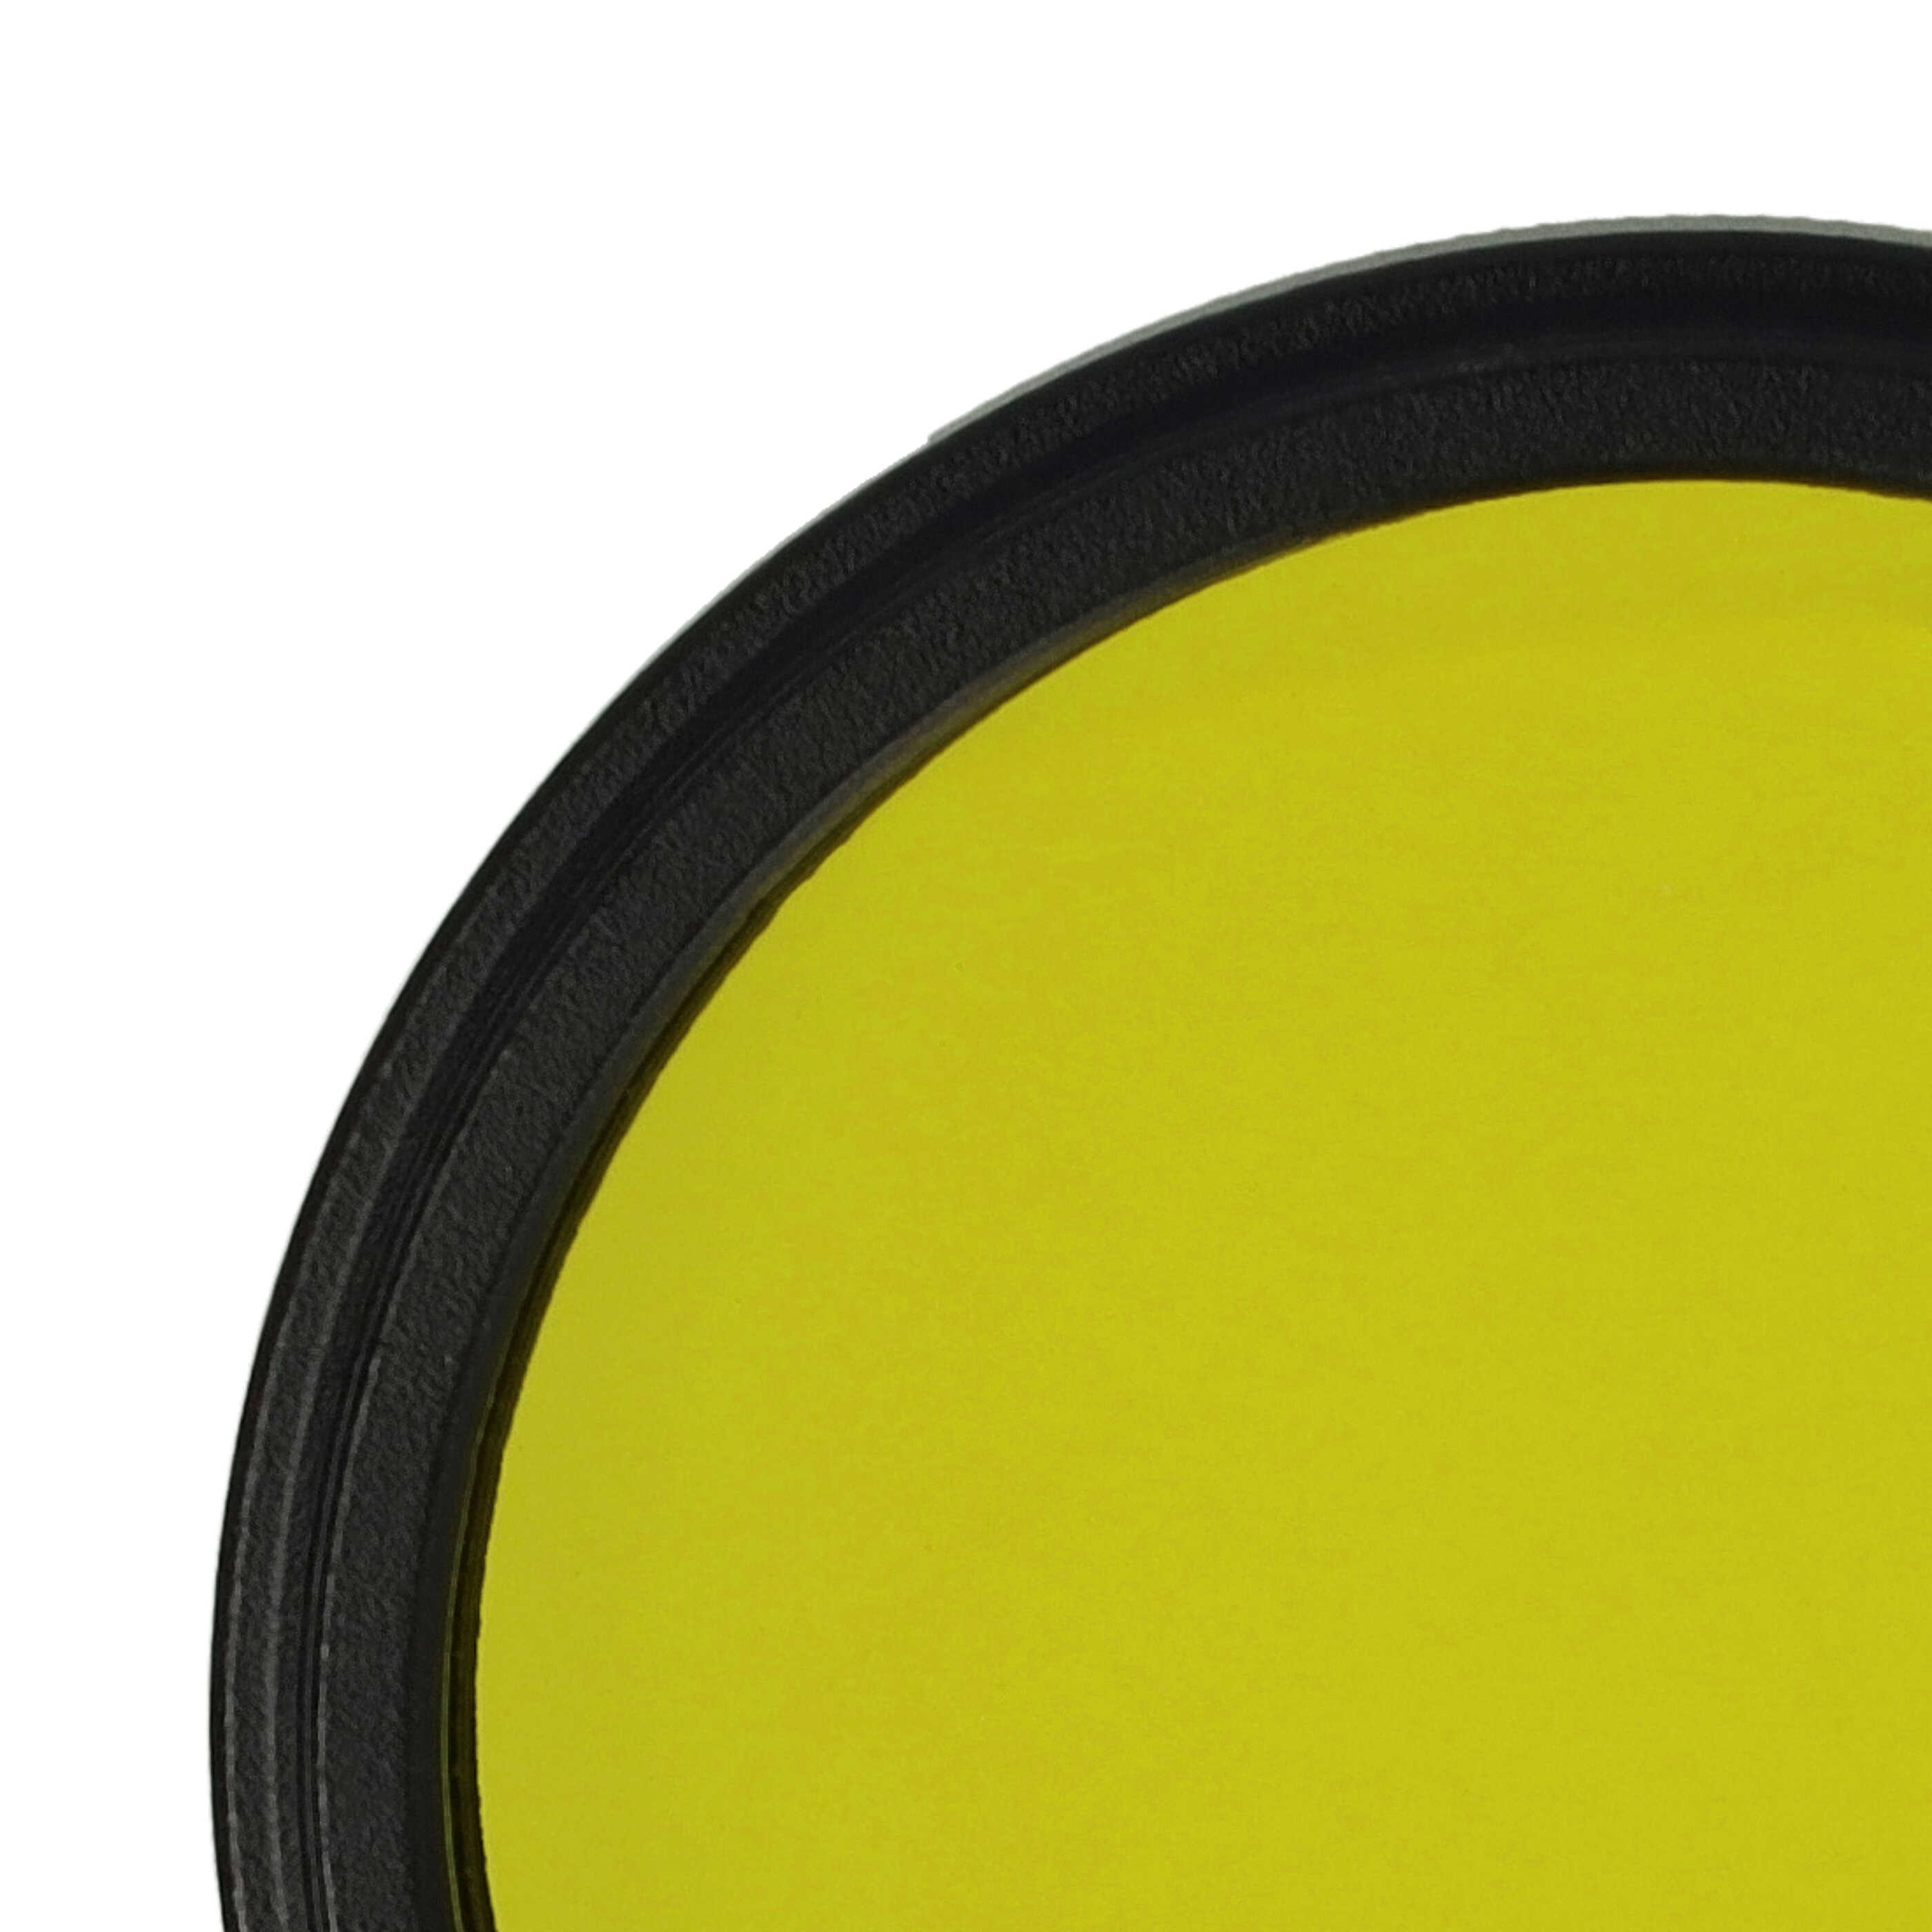 Coloured Filter, Yellow suitable for Camera Lenses with 40.5 mm Filter Thread - Yellow Filter